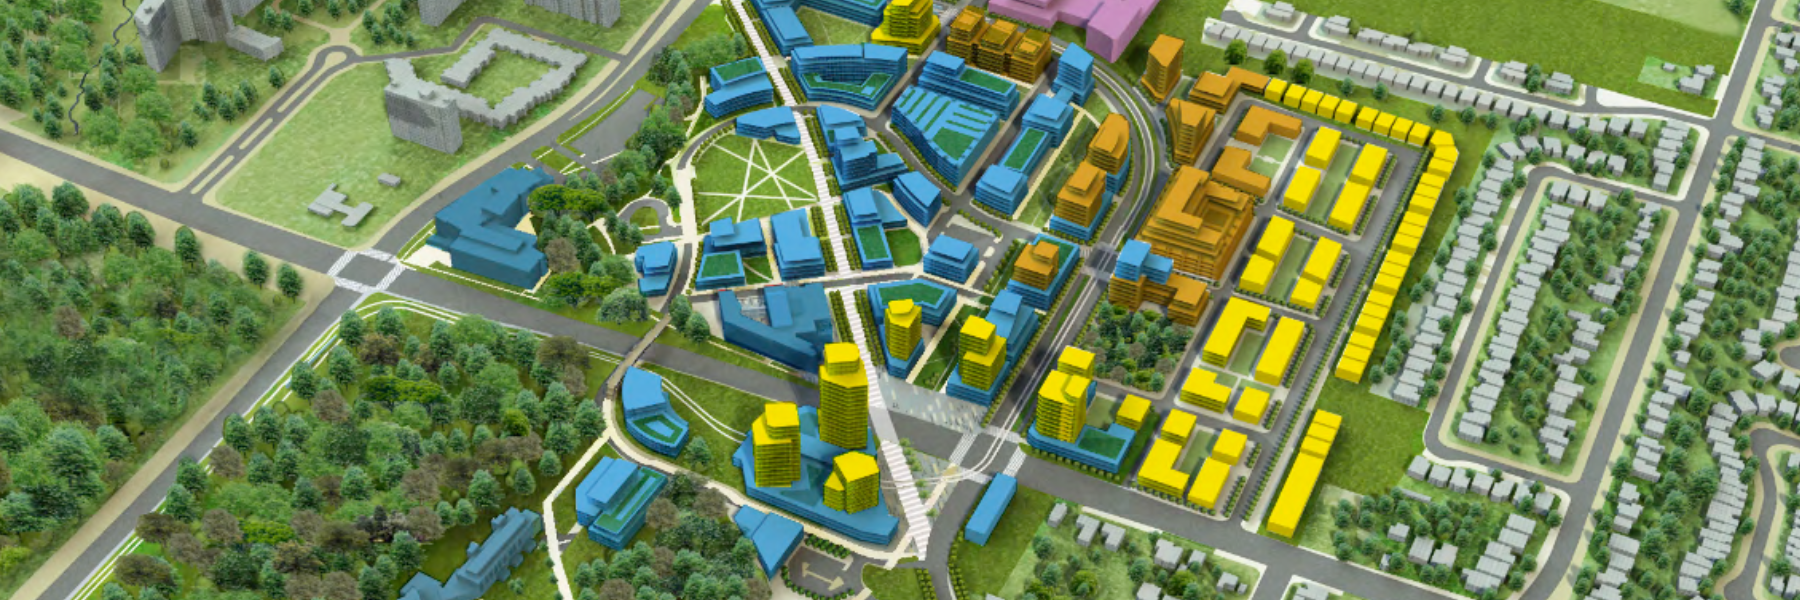 rendering of the aerial view of UTSC campus and surrounding areas after construction is over